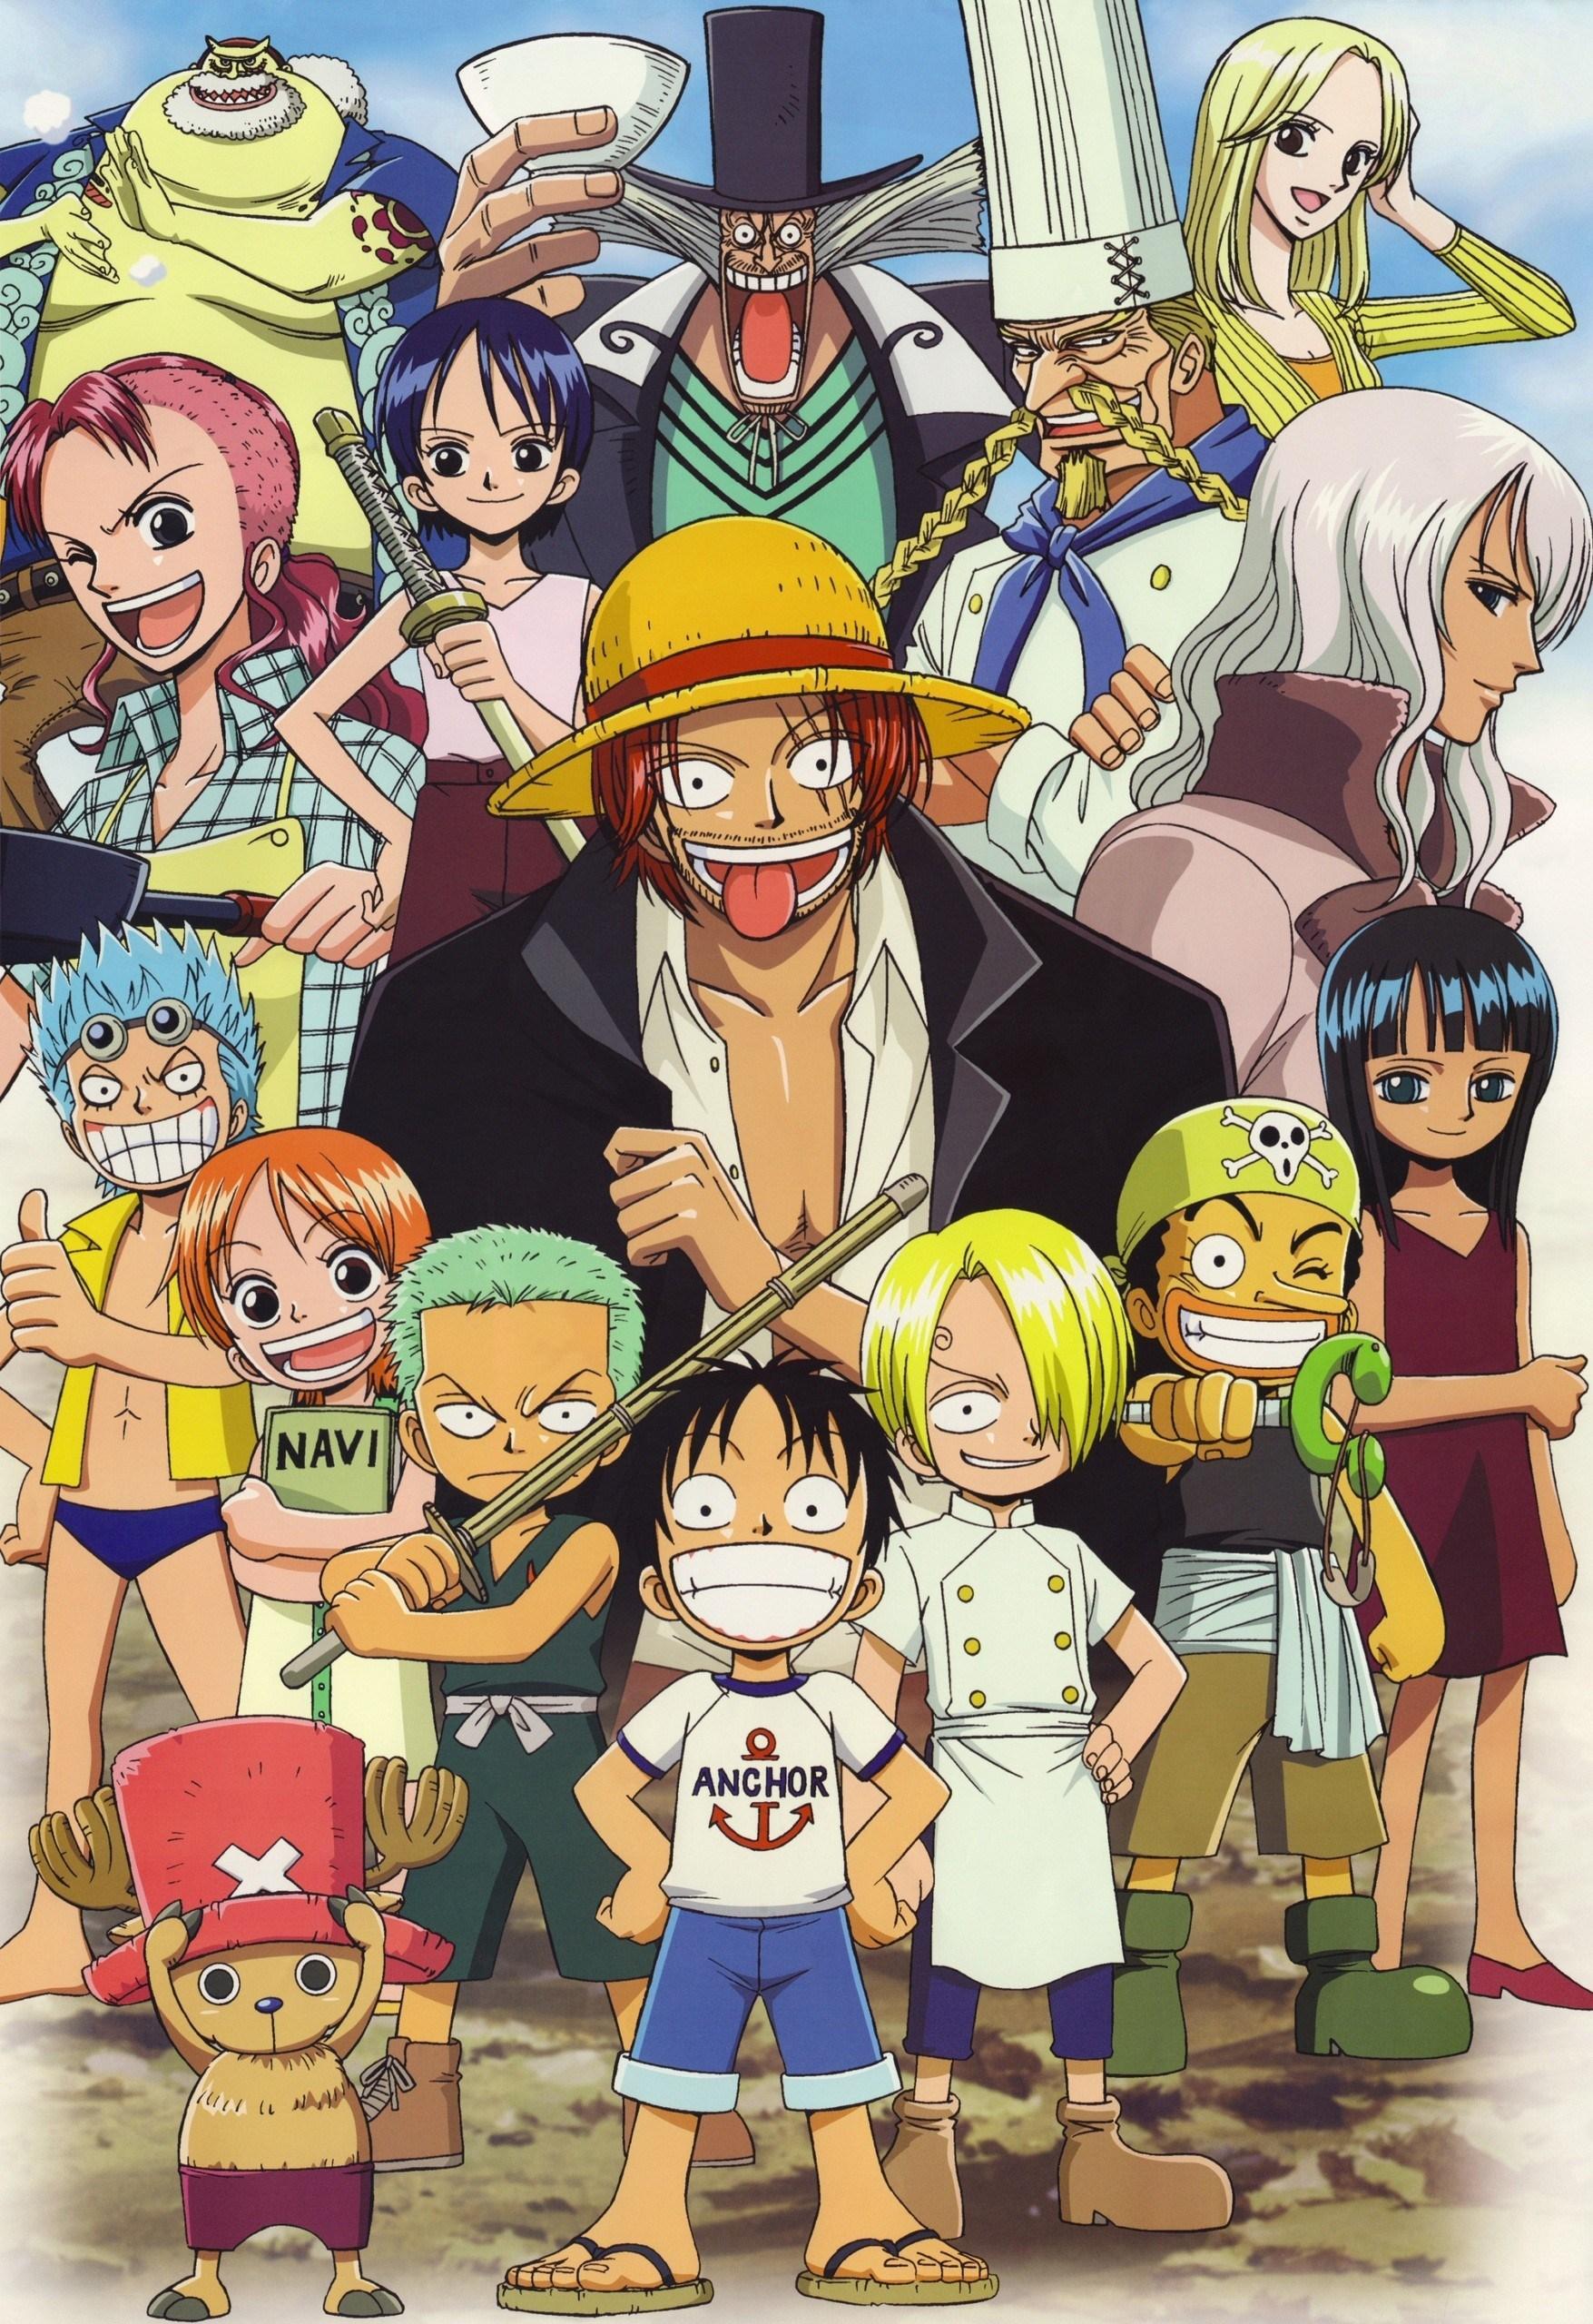 One Piece Phone Wallpapers Wallpaper Cave